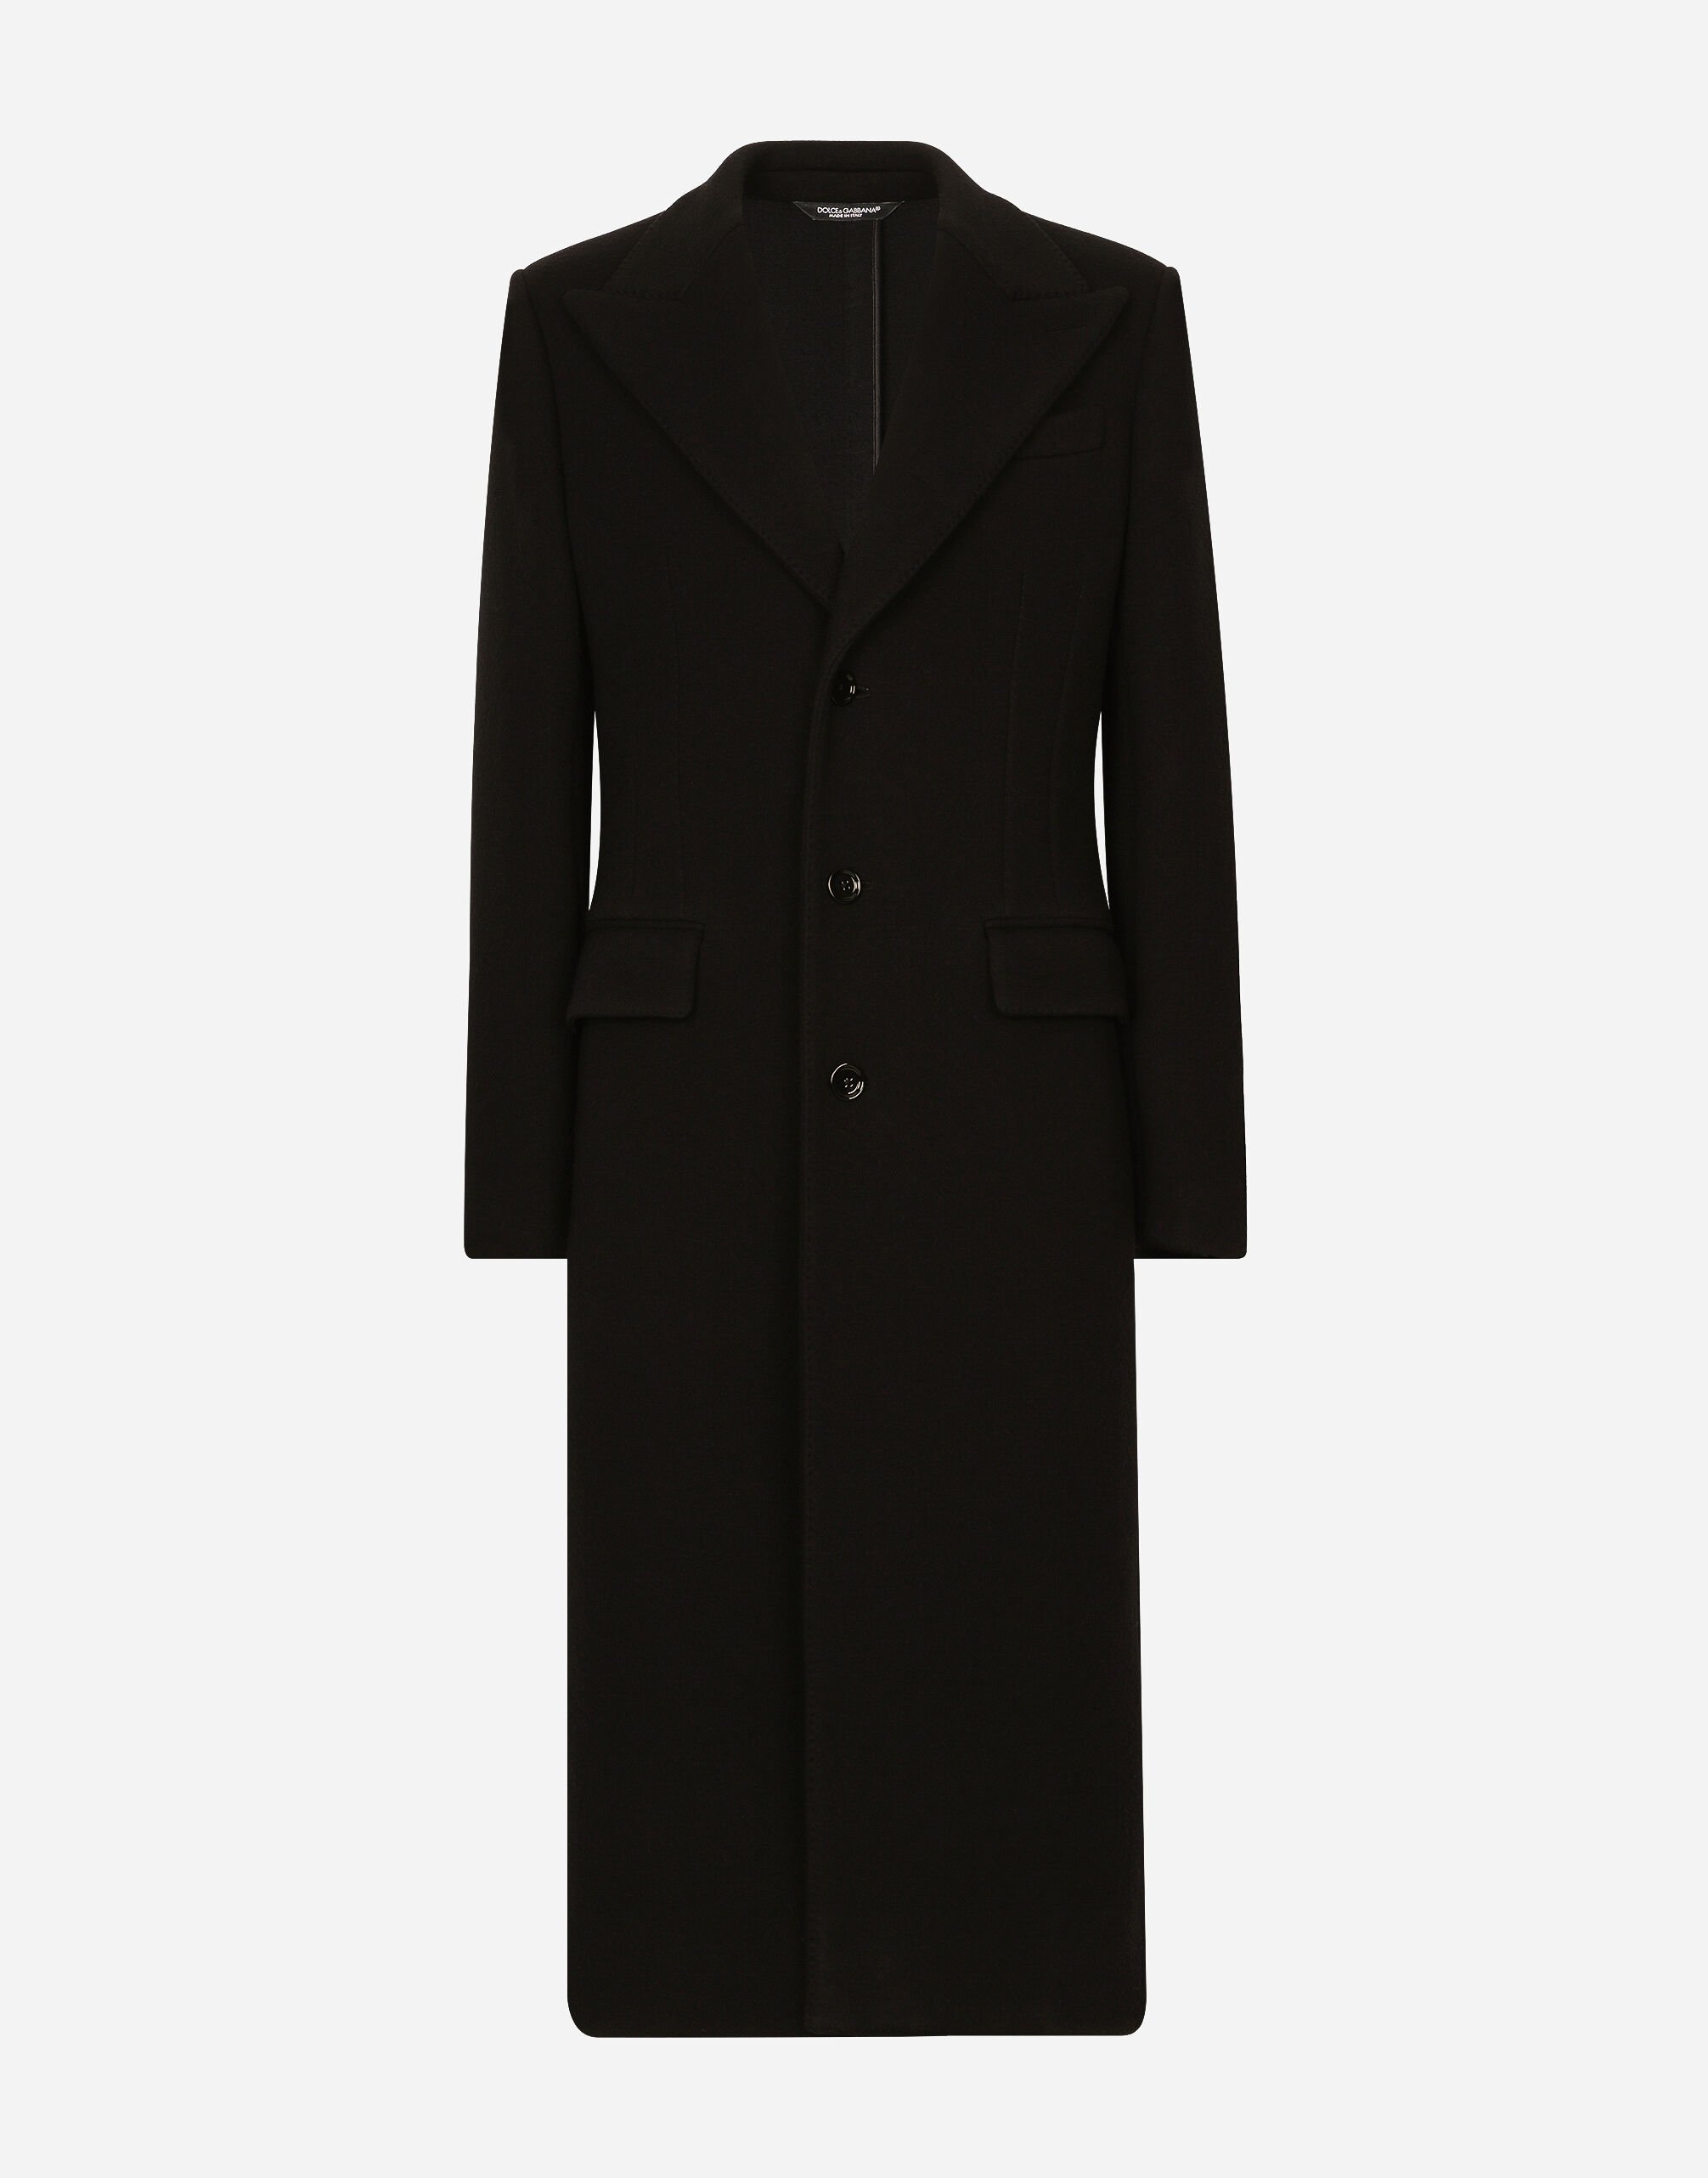 Dolce & Gabbana Single-breasted technical wool jersey coat Black A10792A1203